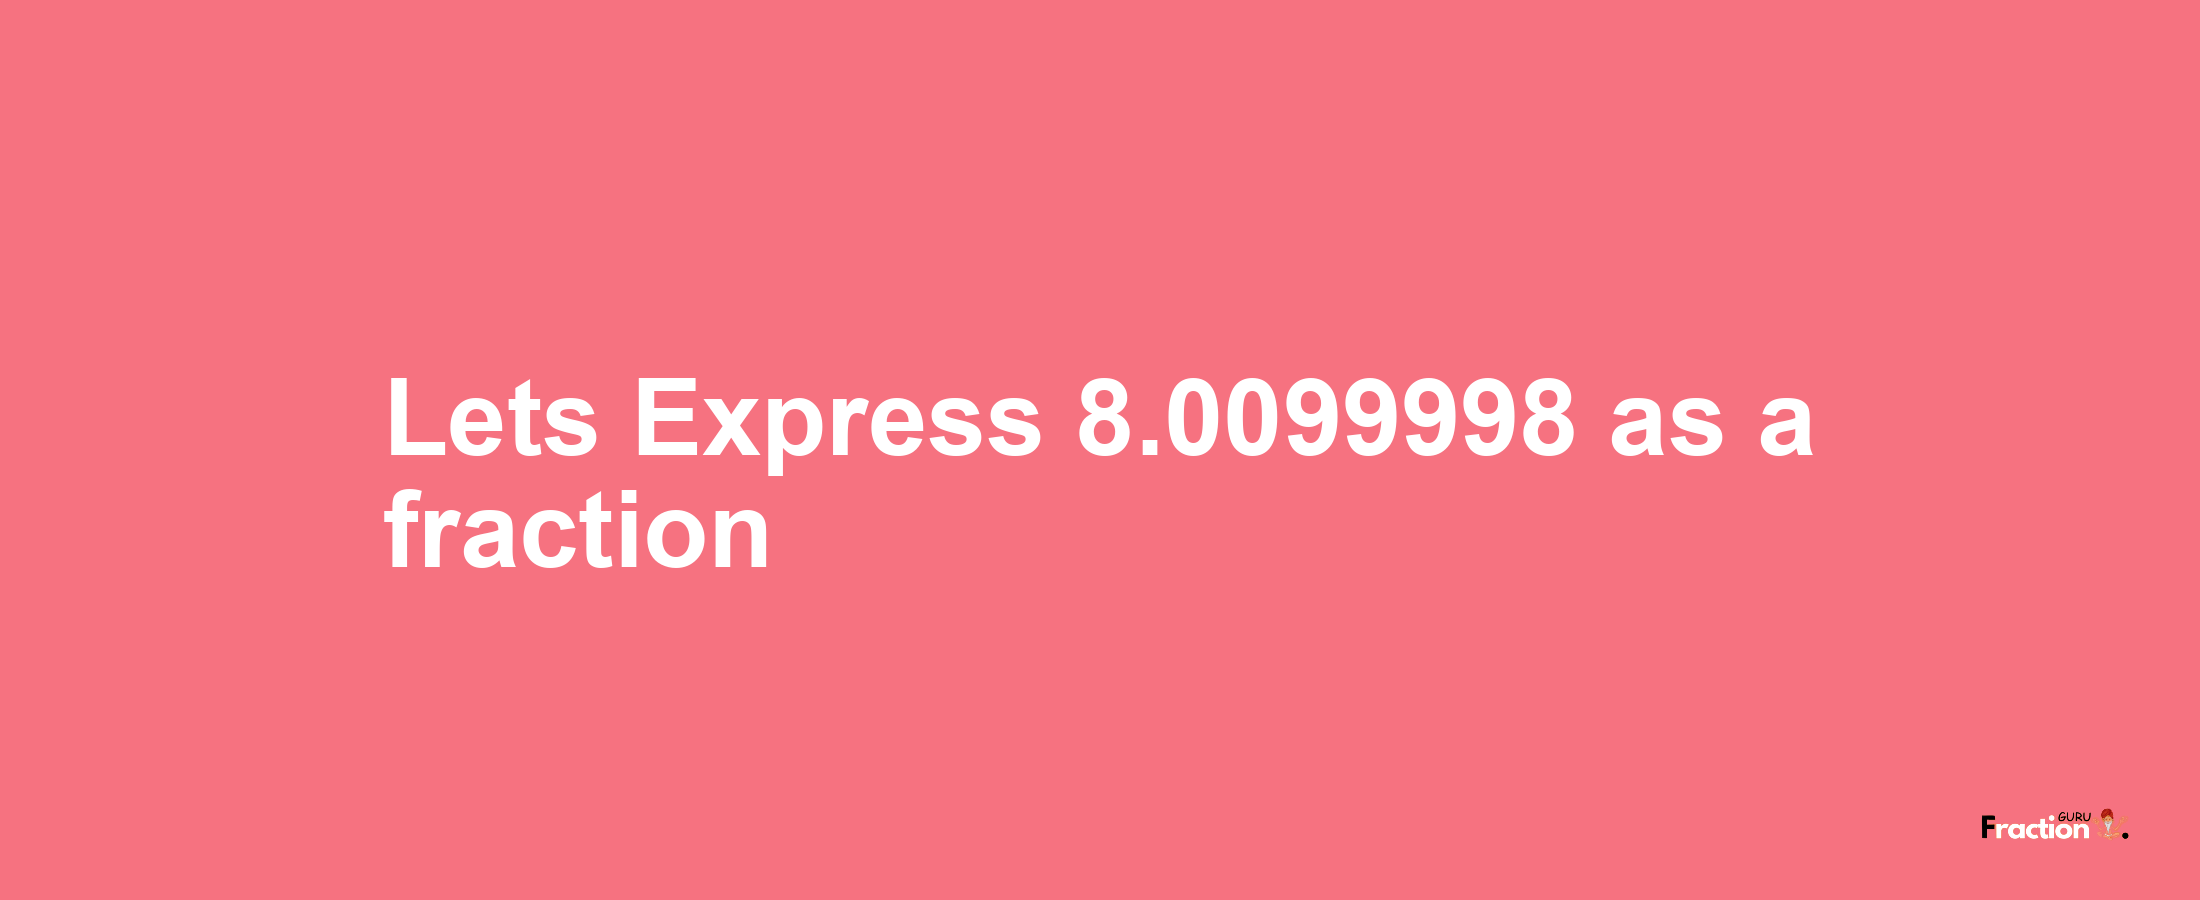 Lets Express 8.0099998 as afraction